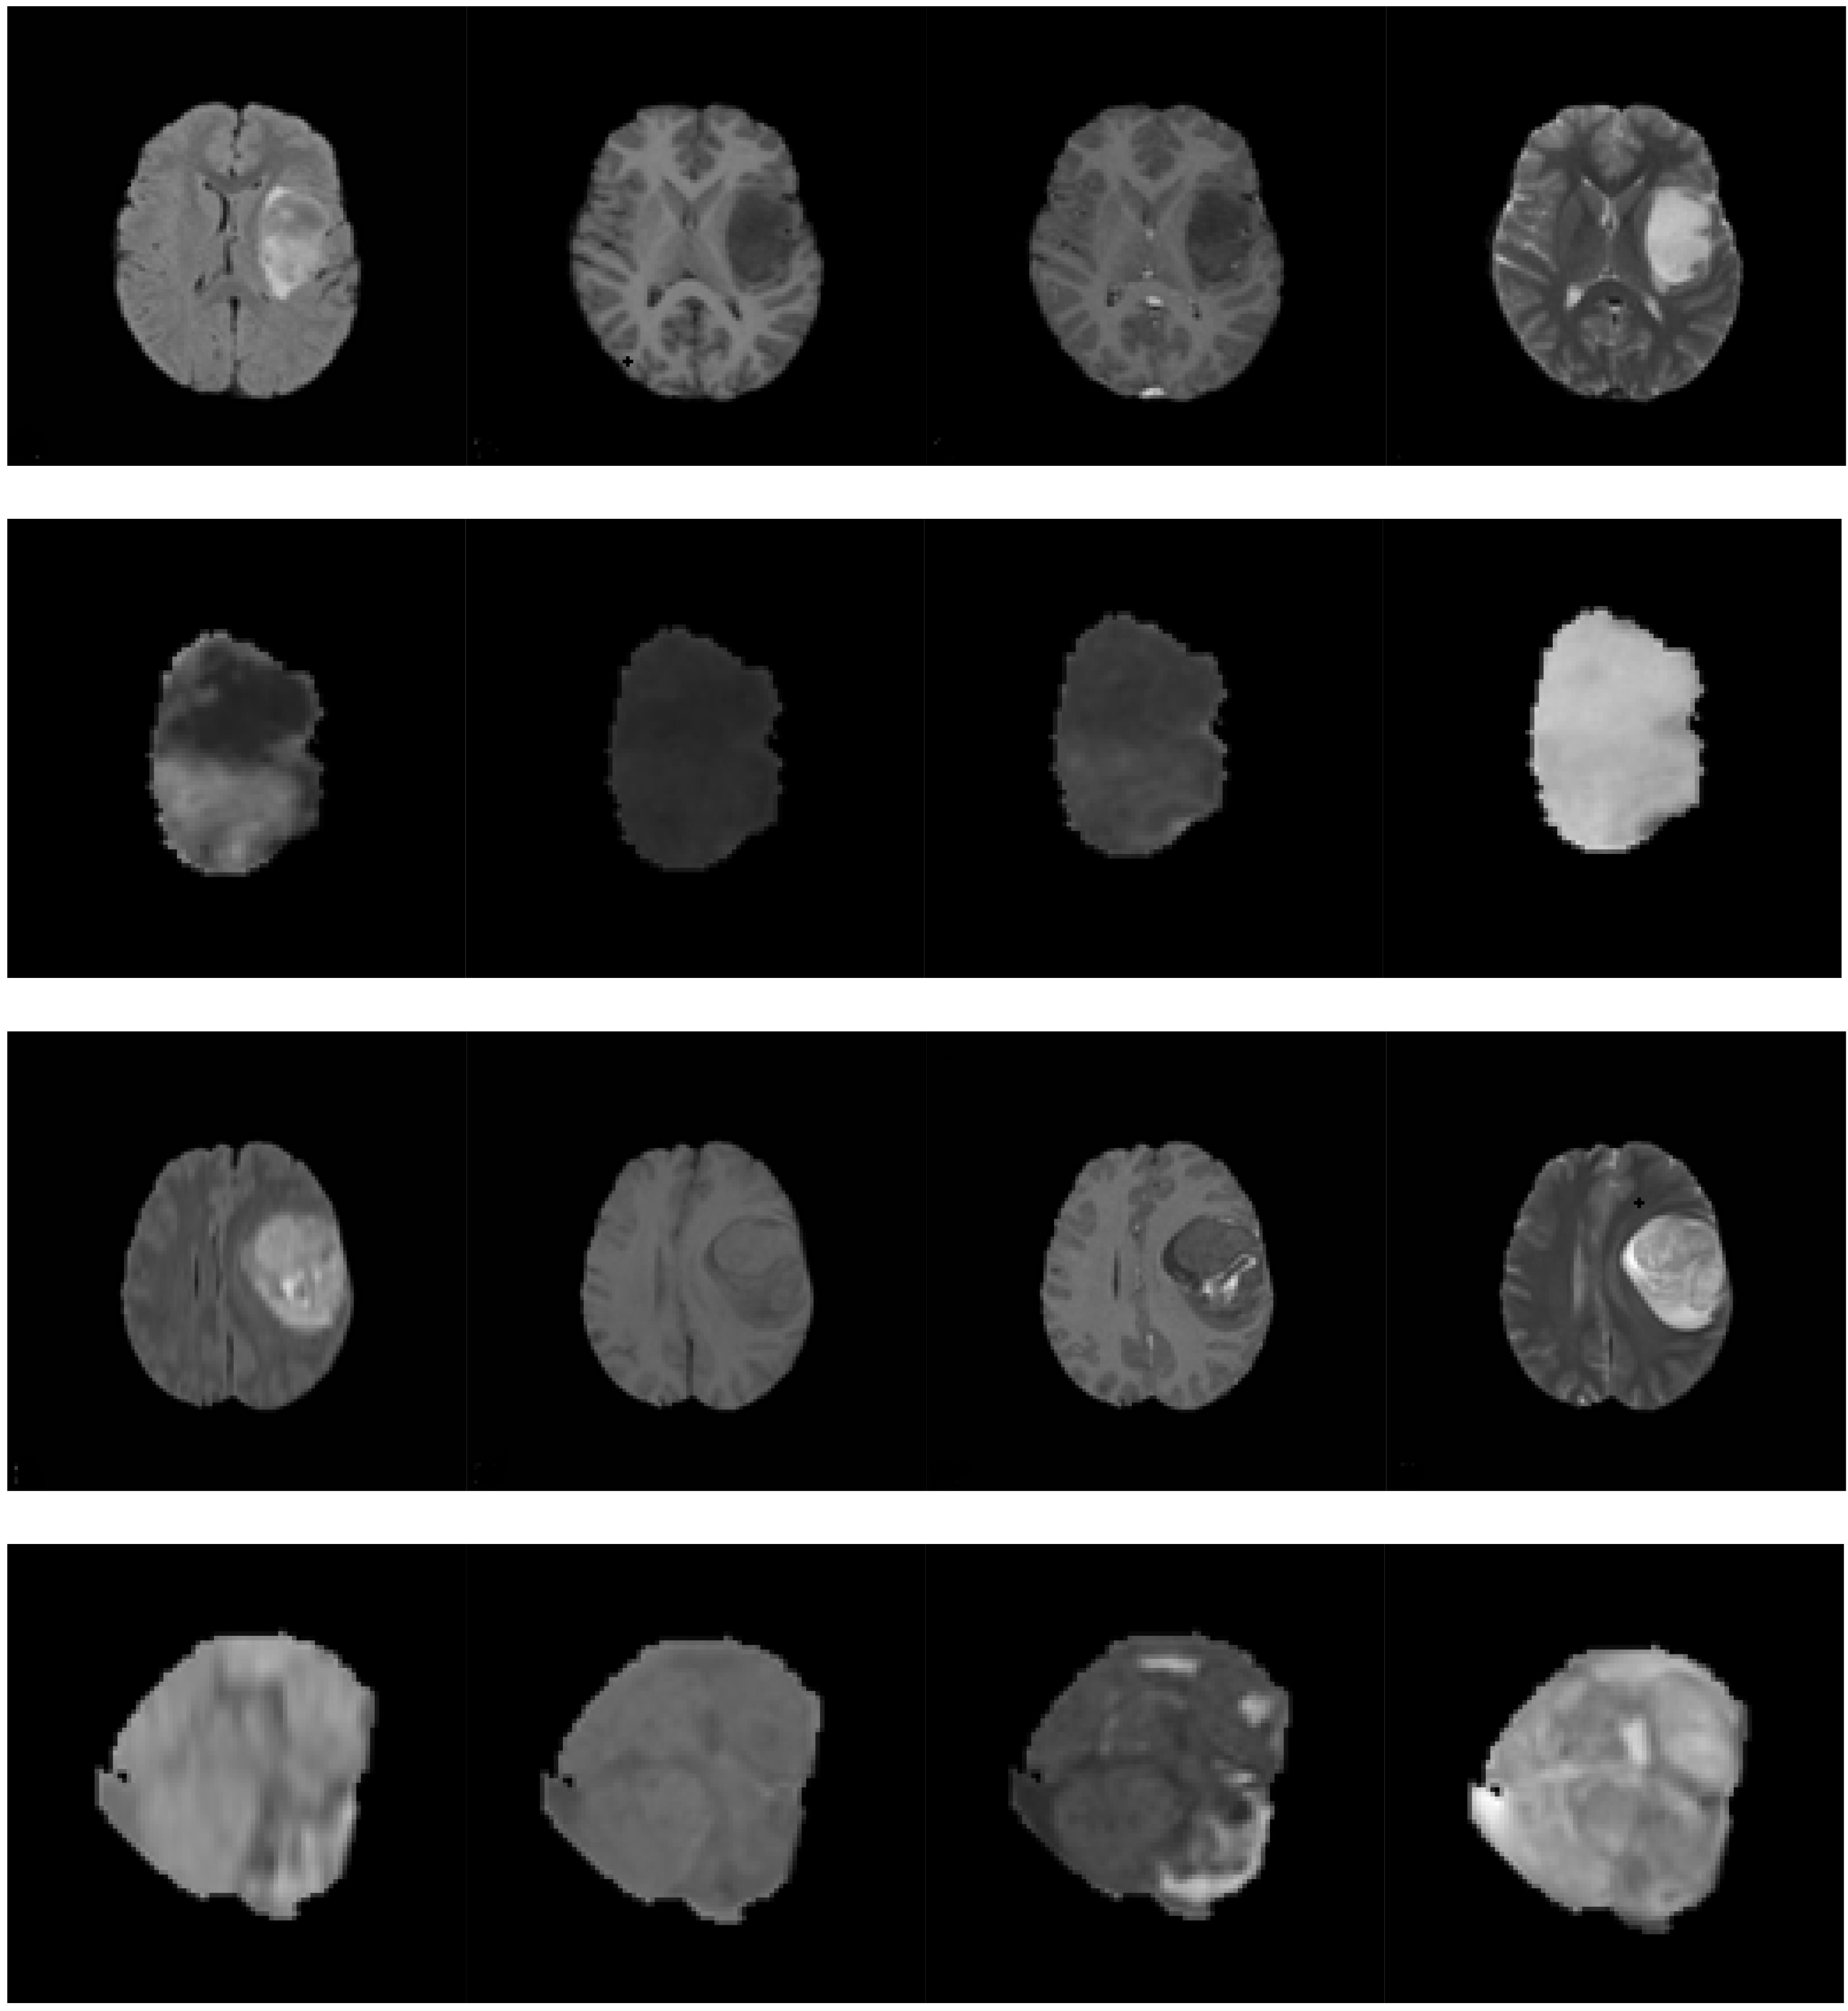 Multi-sequence MRIs of the low grade glioma and high grade glioma. The first through last rows are as follows: (1) the multi-sequence MRIs of the low grade glioma; (2) the tumor region extracted from the images in the first row; (3) the multi-sequence MRIs of the high grade glioma; and (4) the tumor region extracted from the images in the third row. The first through last columns are as follows: FLAIR sequence, T1-w sequence, T1-wc sequence, and T2-w sequence, respectively.